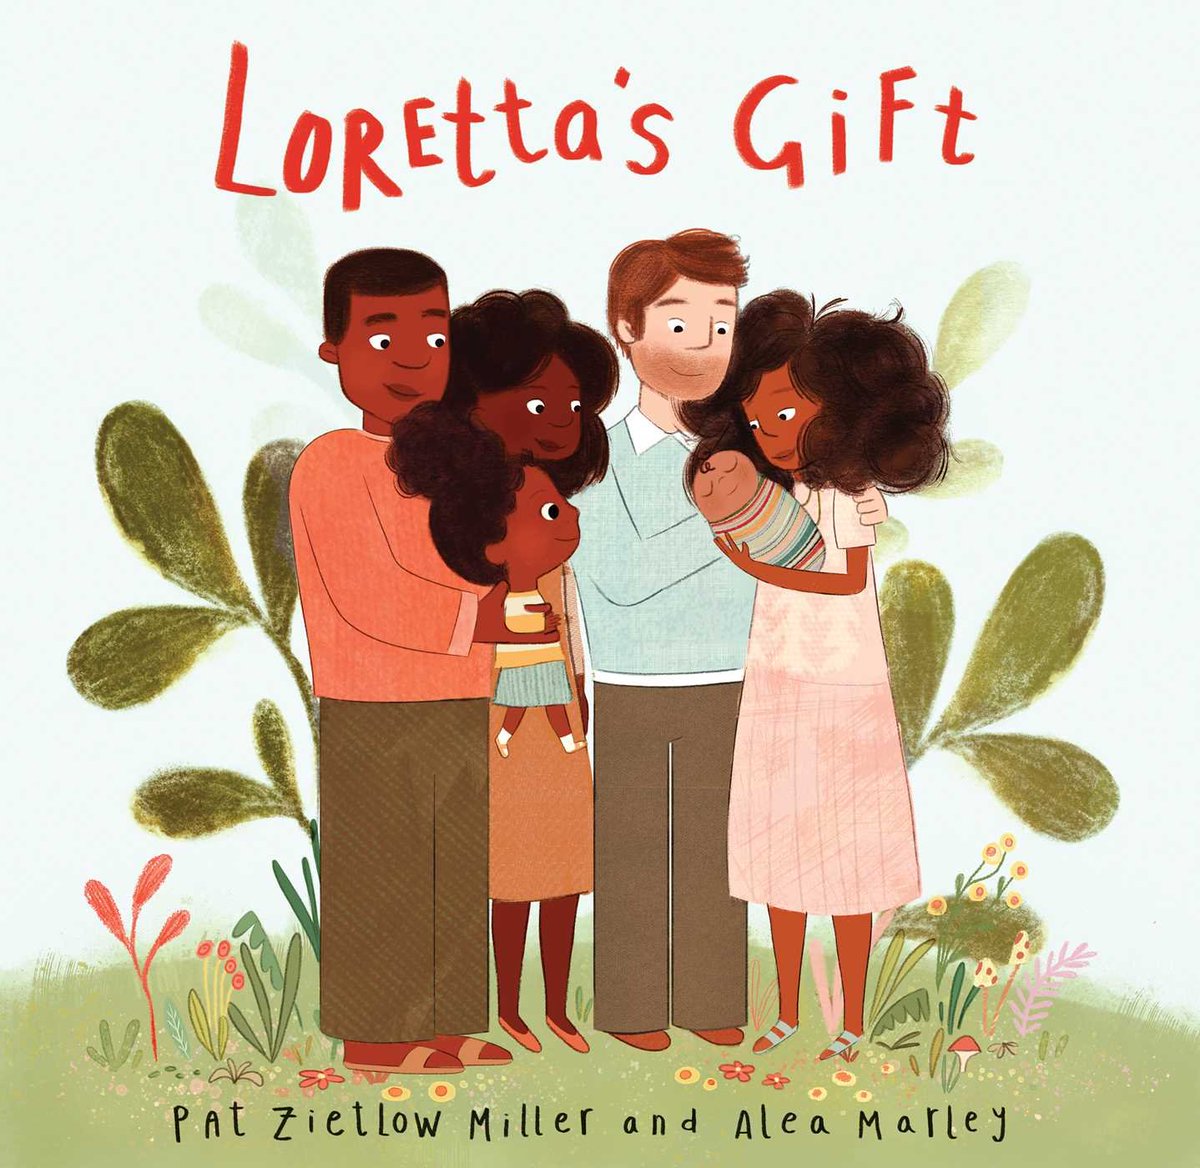 The best gifts don't always come in pretty gift wrapped boxes. Sometimes the best gifts are intangible: showing up, offering love, giving support, & being YOU. Watch as Loretta learns this in a beautifully crafted book by  @PatZMiller with gorgeous illustrations from  @aleamarley